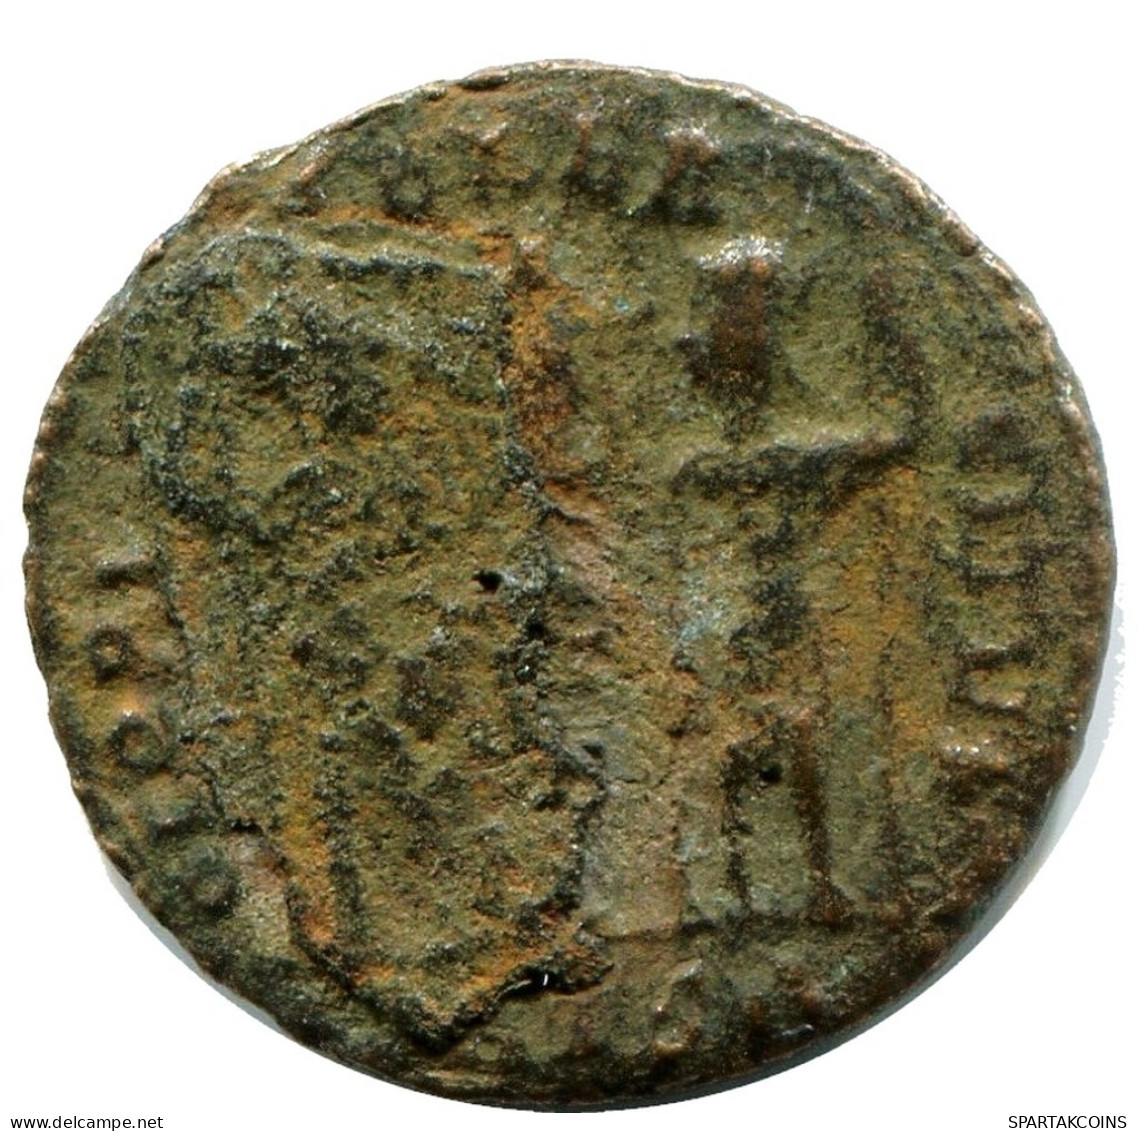 CONSTANS MINTED IN THESSALONICA FOUND IN IHNASYAH HOARD EGYPT #ANC11882.14.E.A - El Impero Christiano (307 / 363)